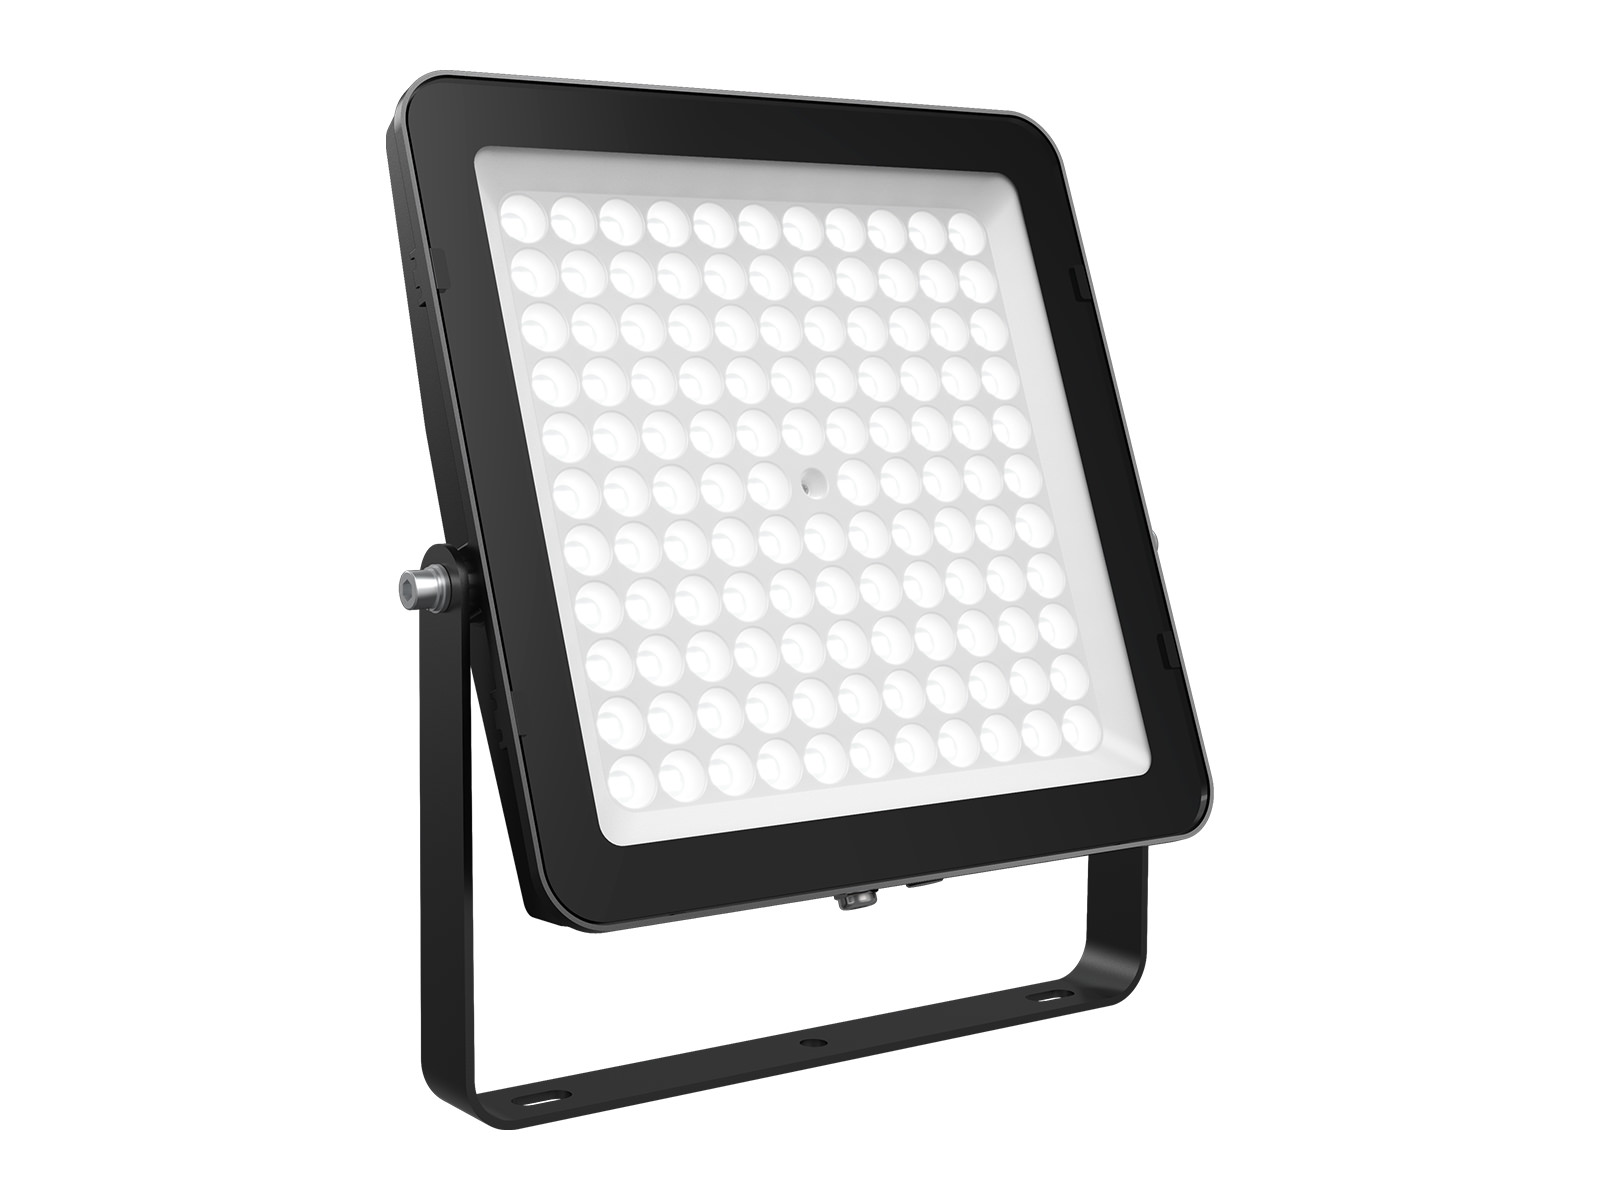 crisis Dead in the world details FL51 50W to 300w Cost-Effective And Anti-Glare LED Floodlight - AGC Lighting